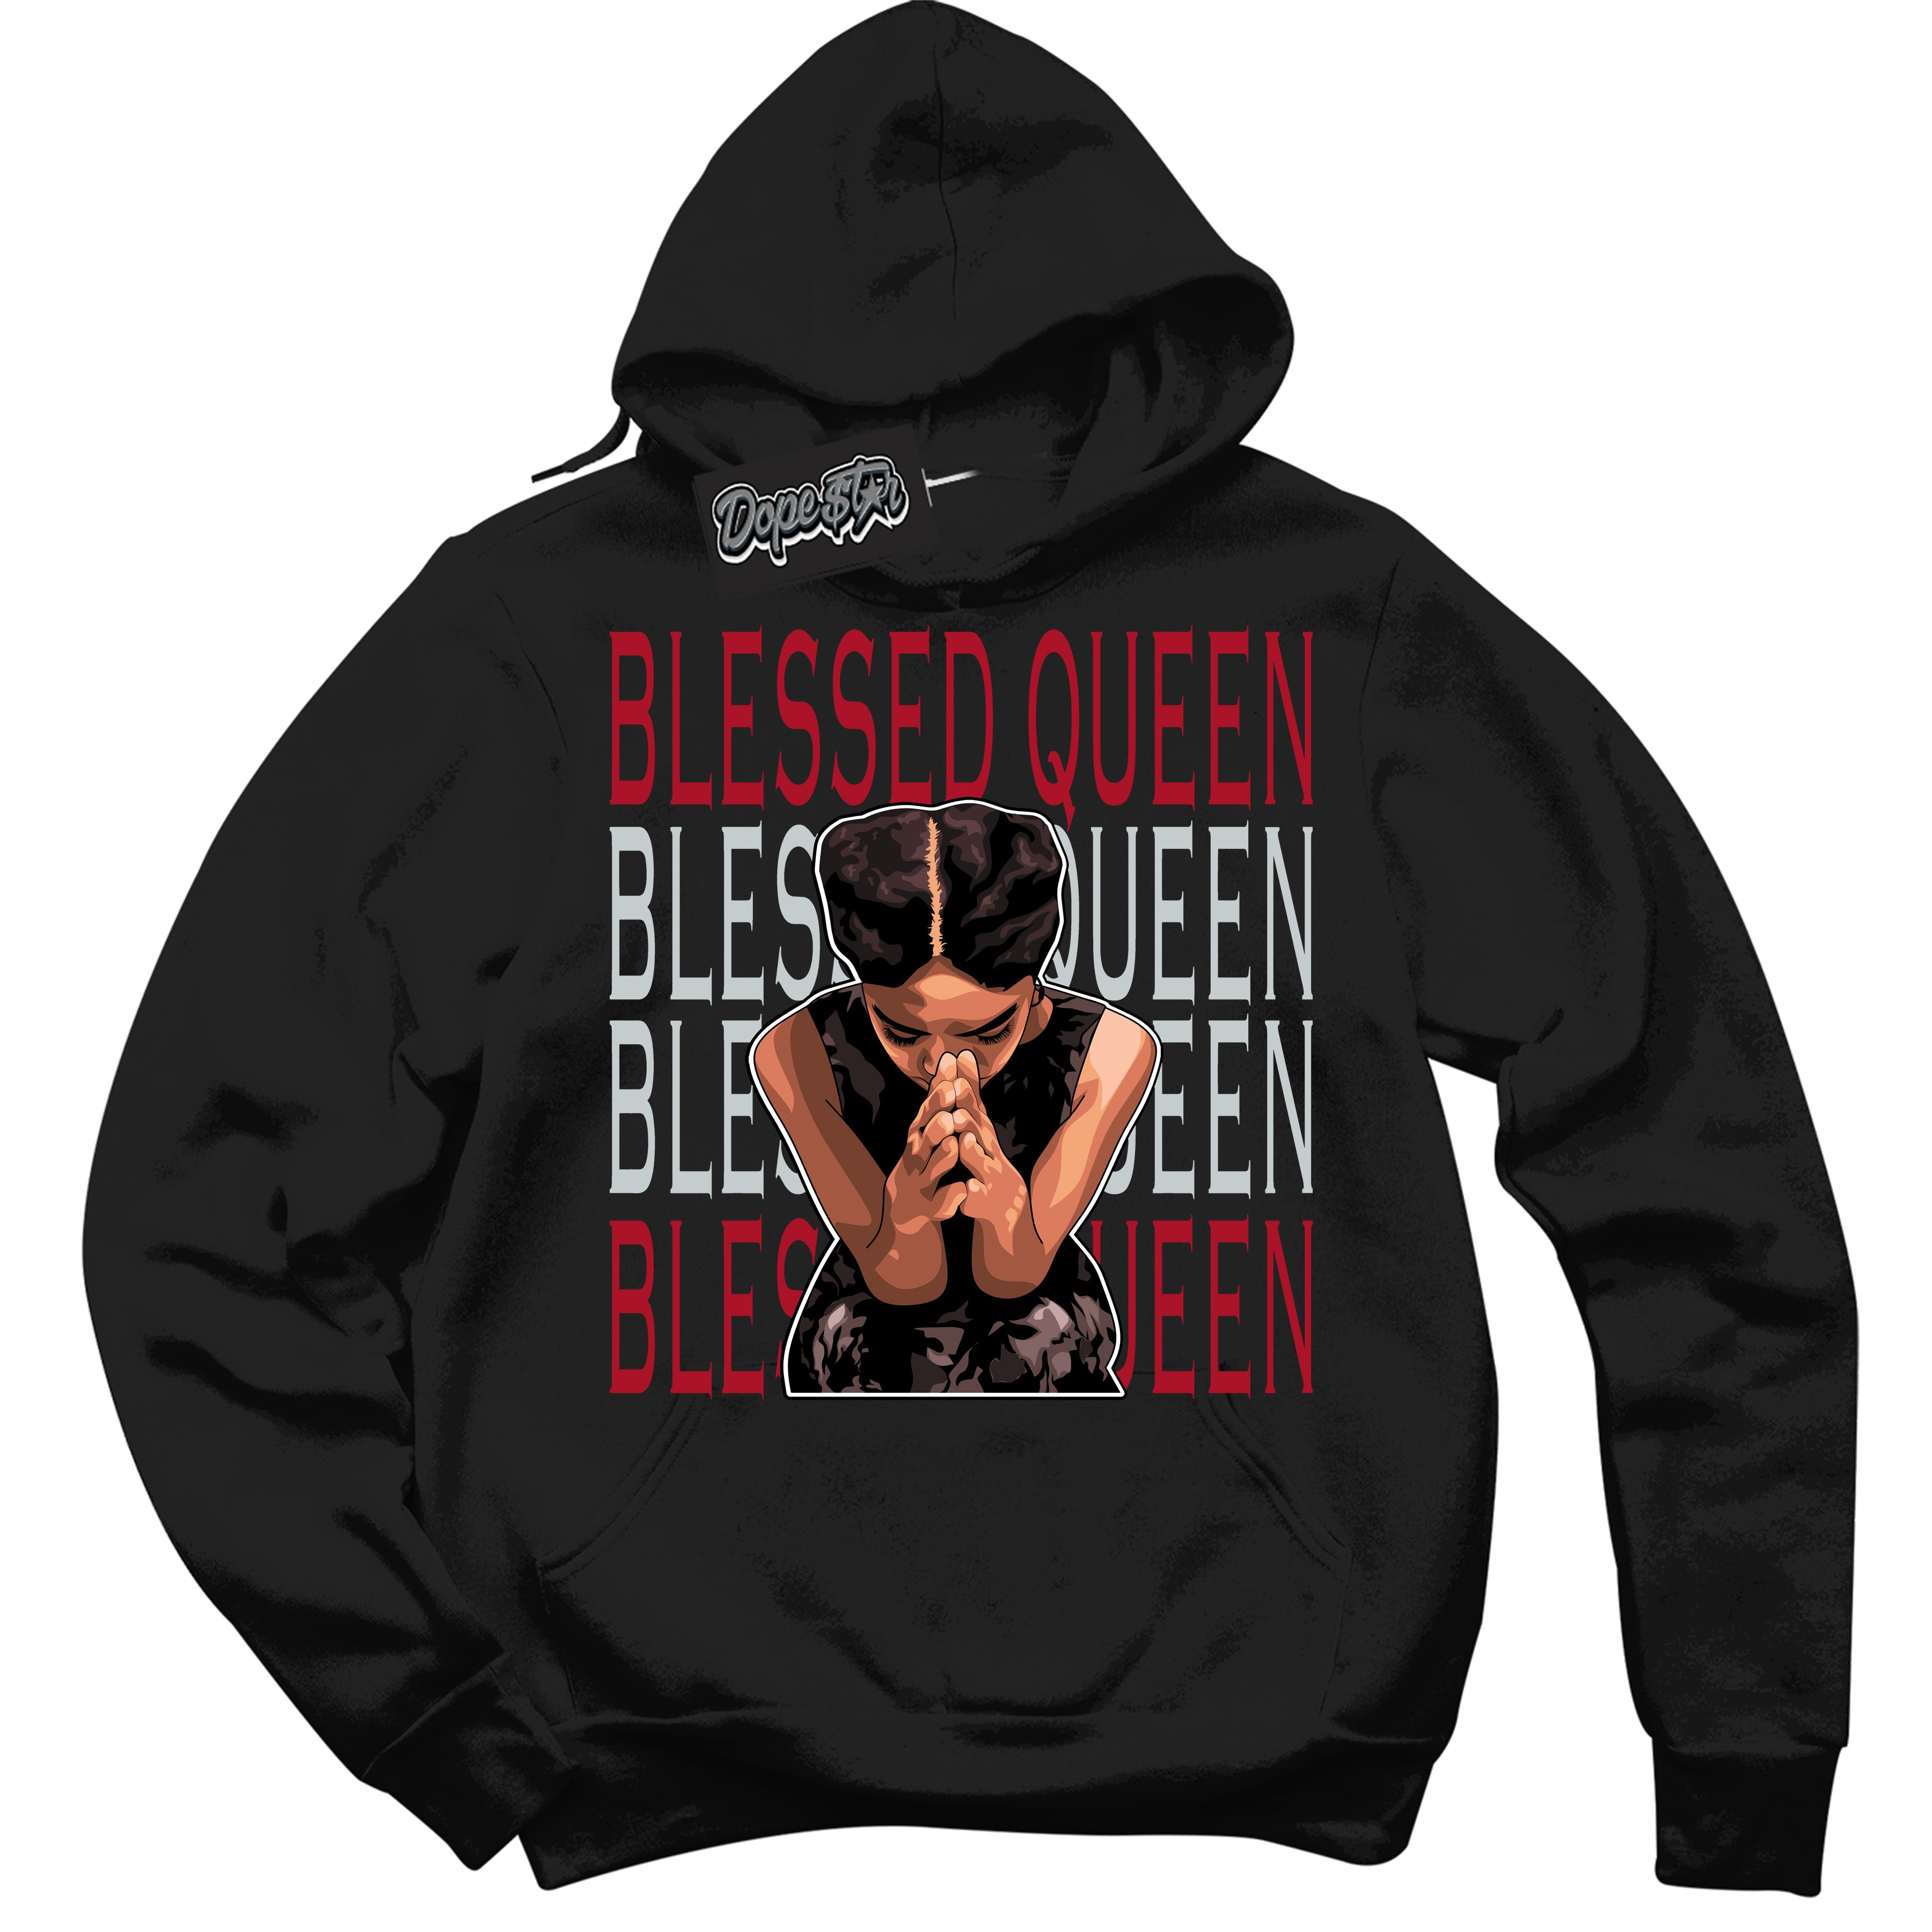 Cool Black Hoodie with “ Blessed Queen ”  design that Perfectly Matches  Reverse Ultraman Sneakers.